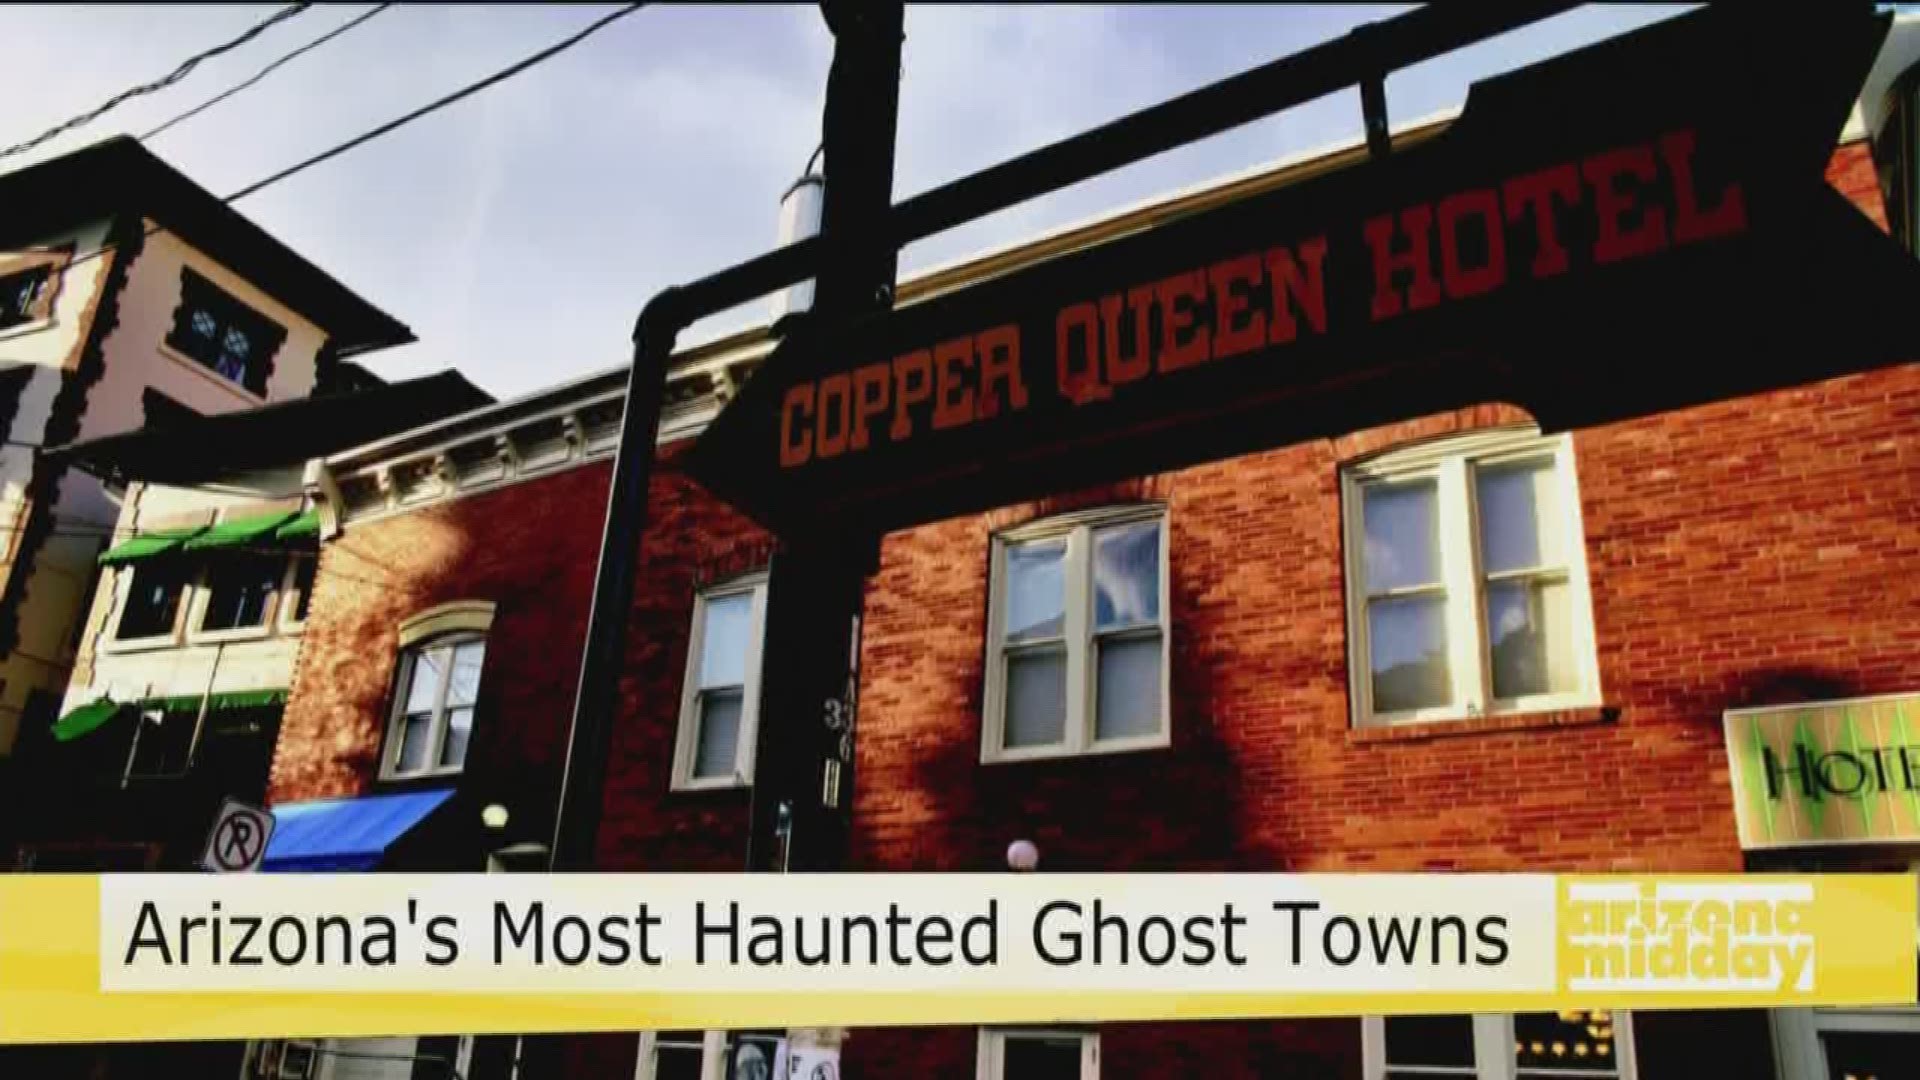 Becky Blaine with the Arizona Office of Tourism tells about all the spooky Ghost Towns you and your family can visit this Halloween season!